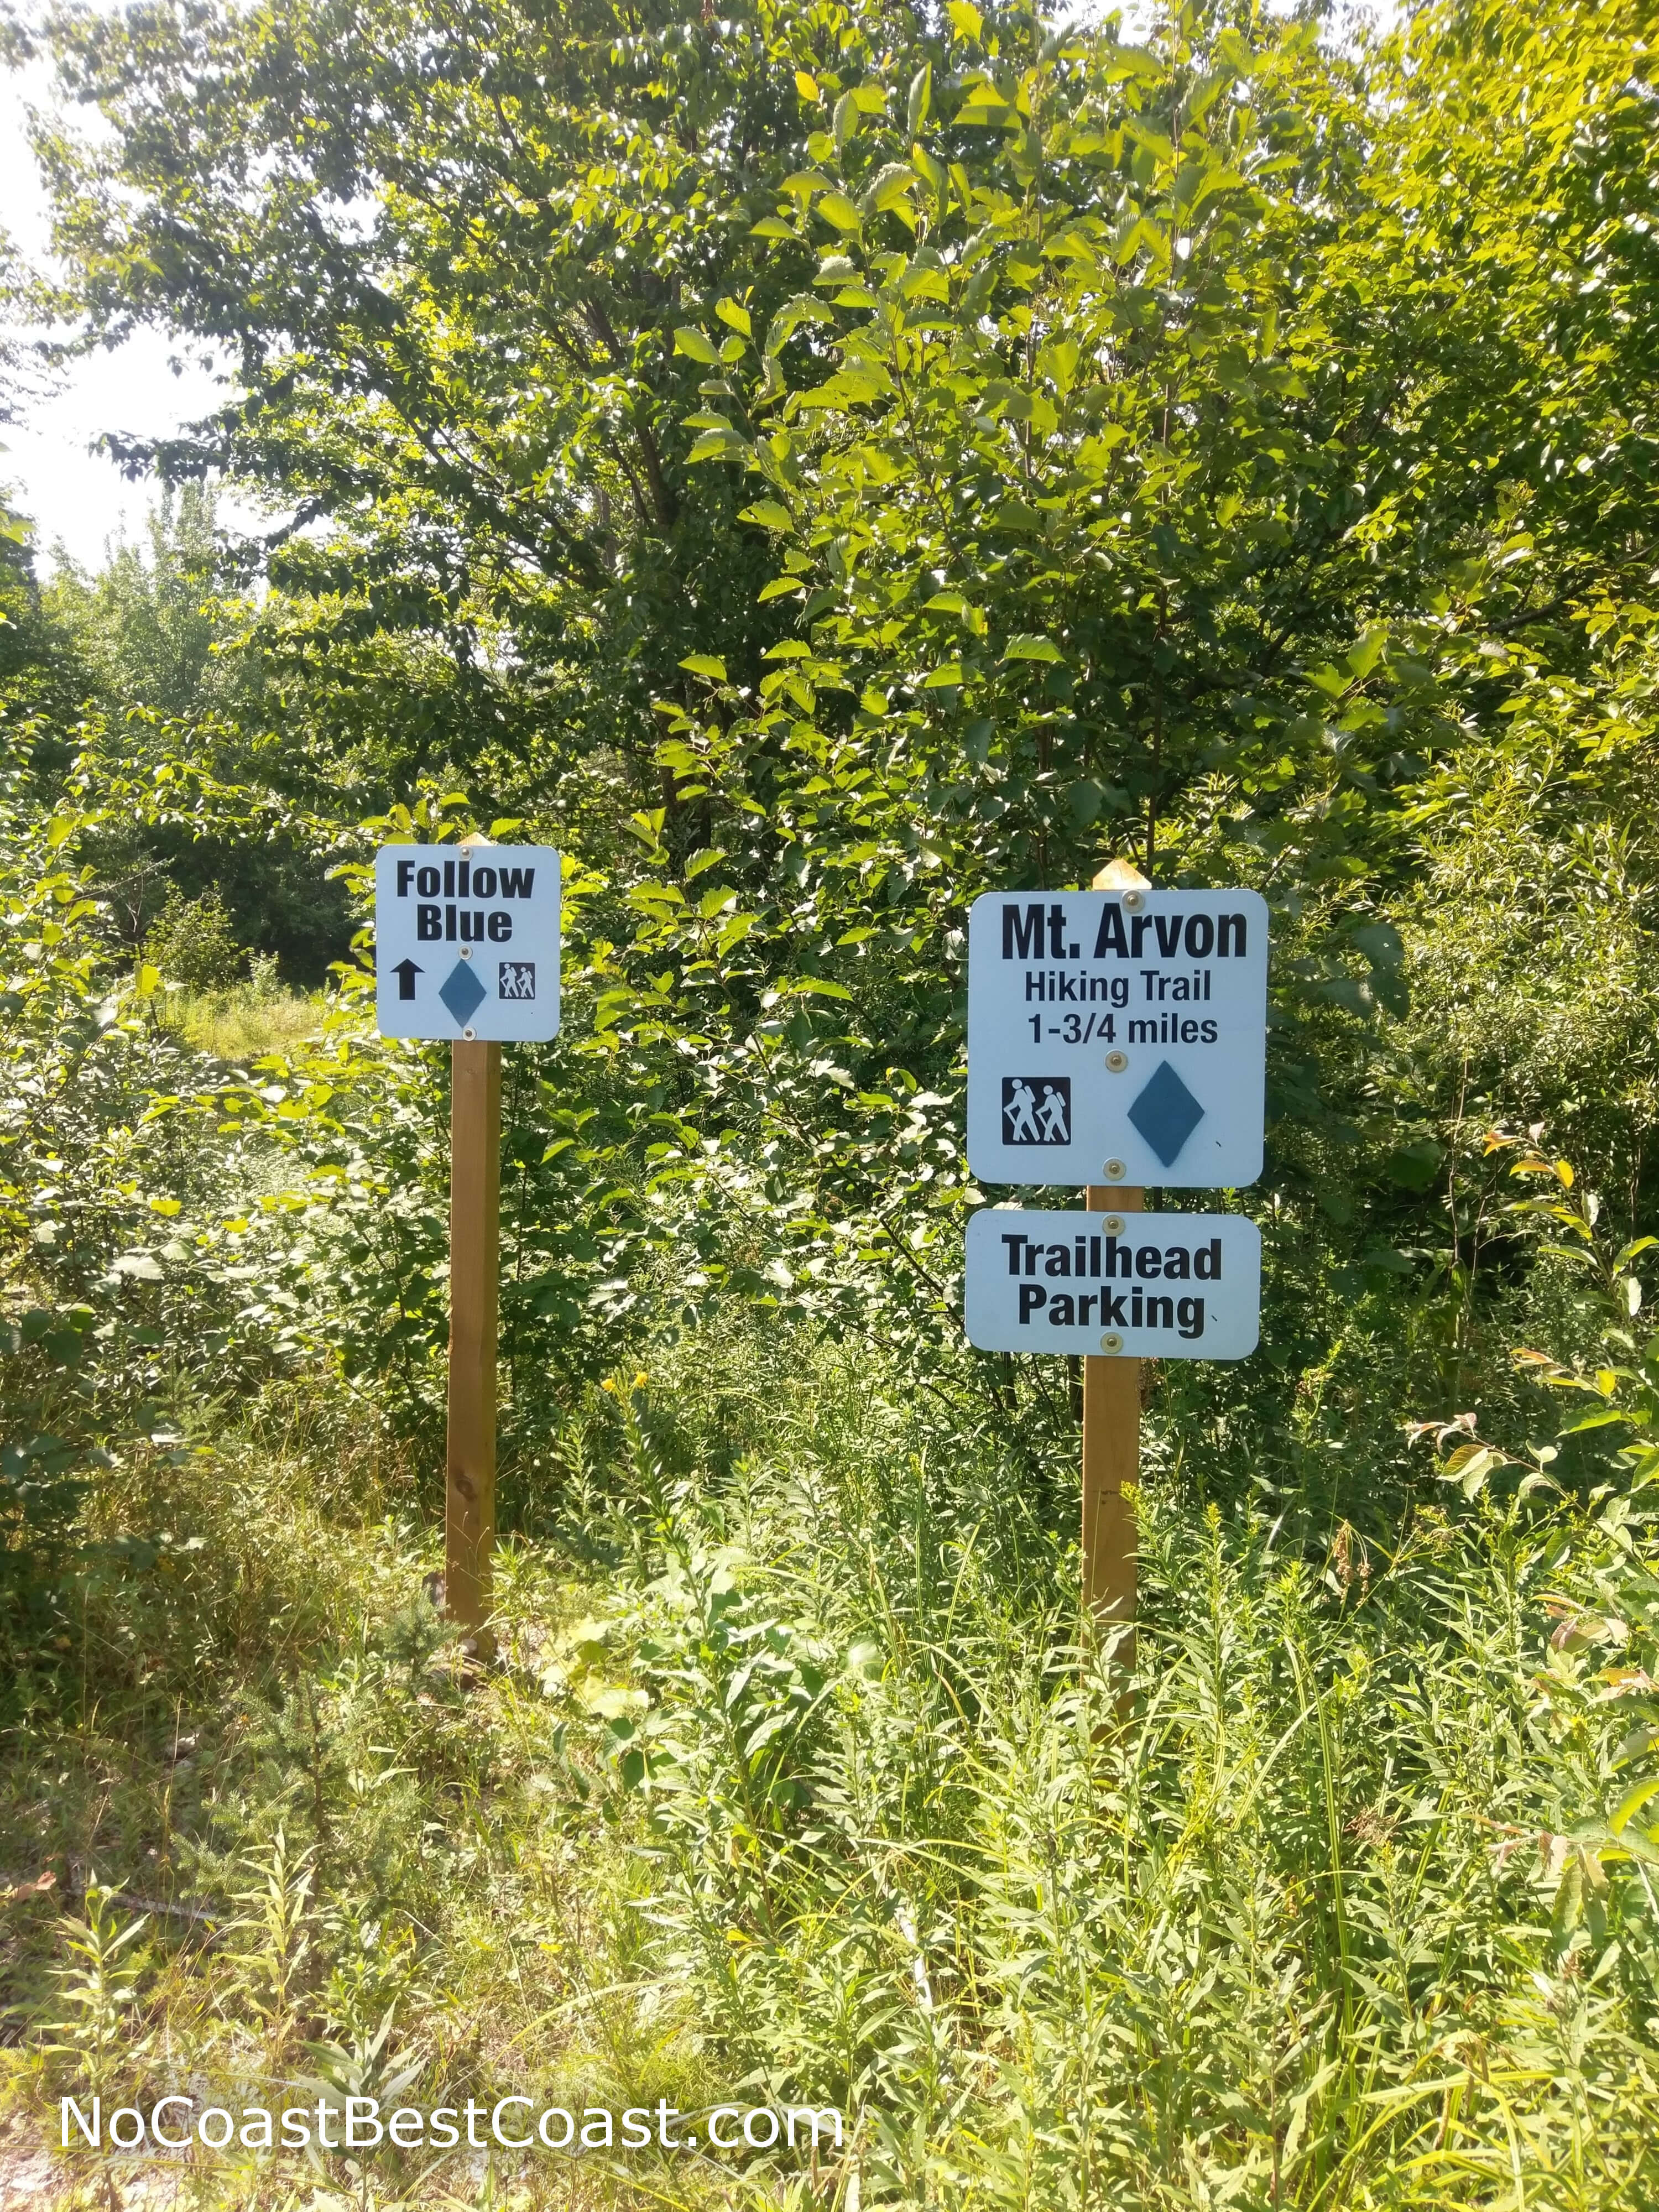 The sign labeling the parking area for Mount Arvon